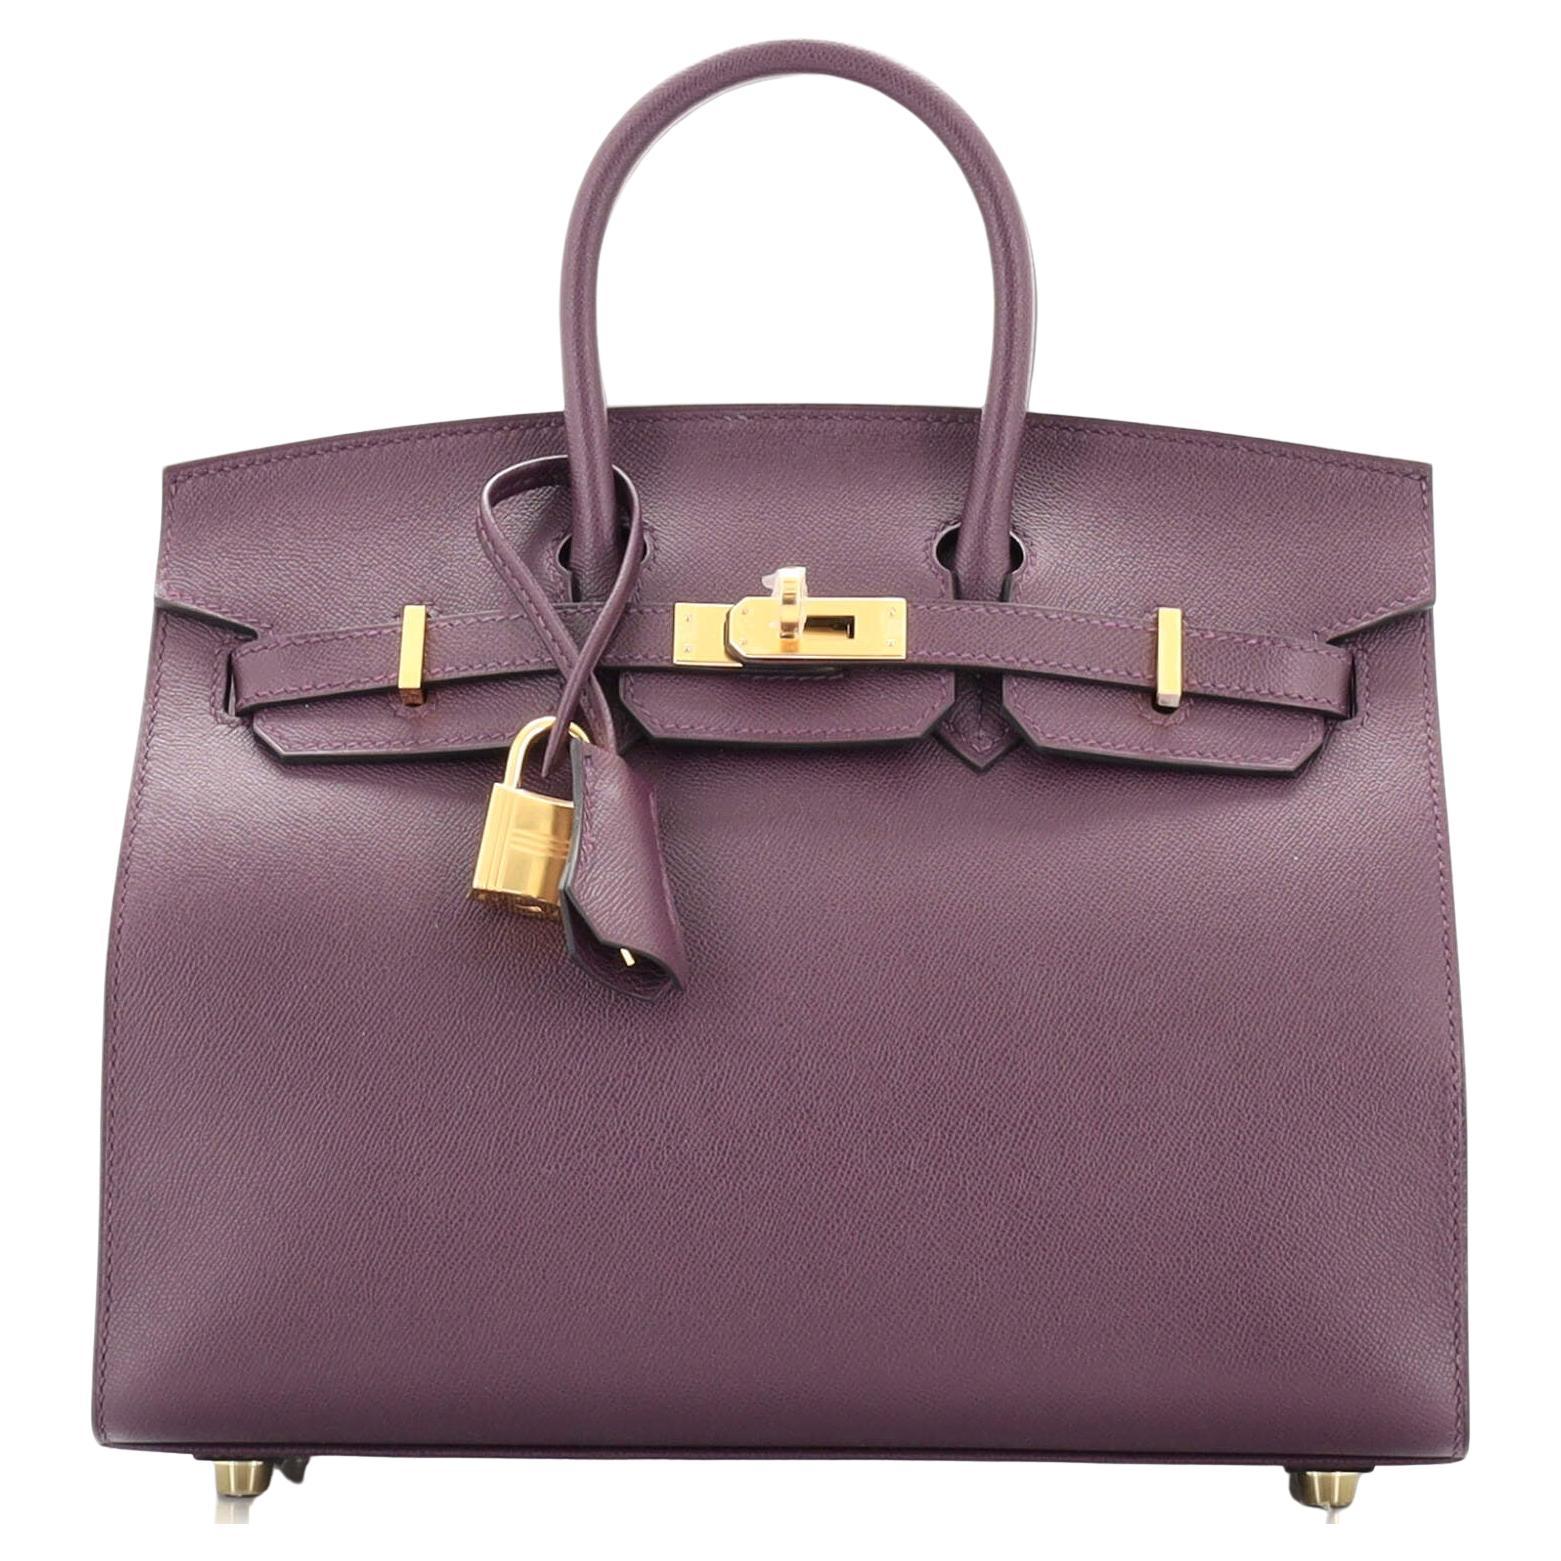 Hermes Birkin Sellier Bag Cassis Madame with Gold Hardware 25